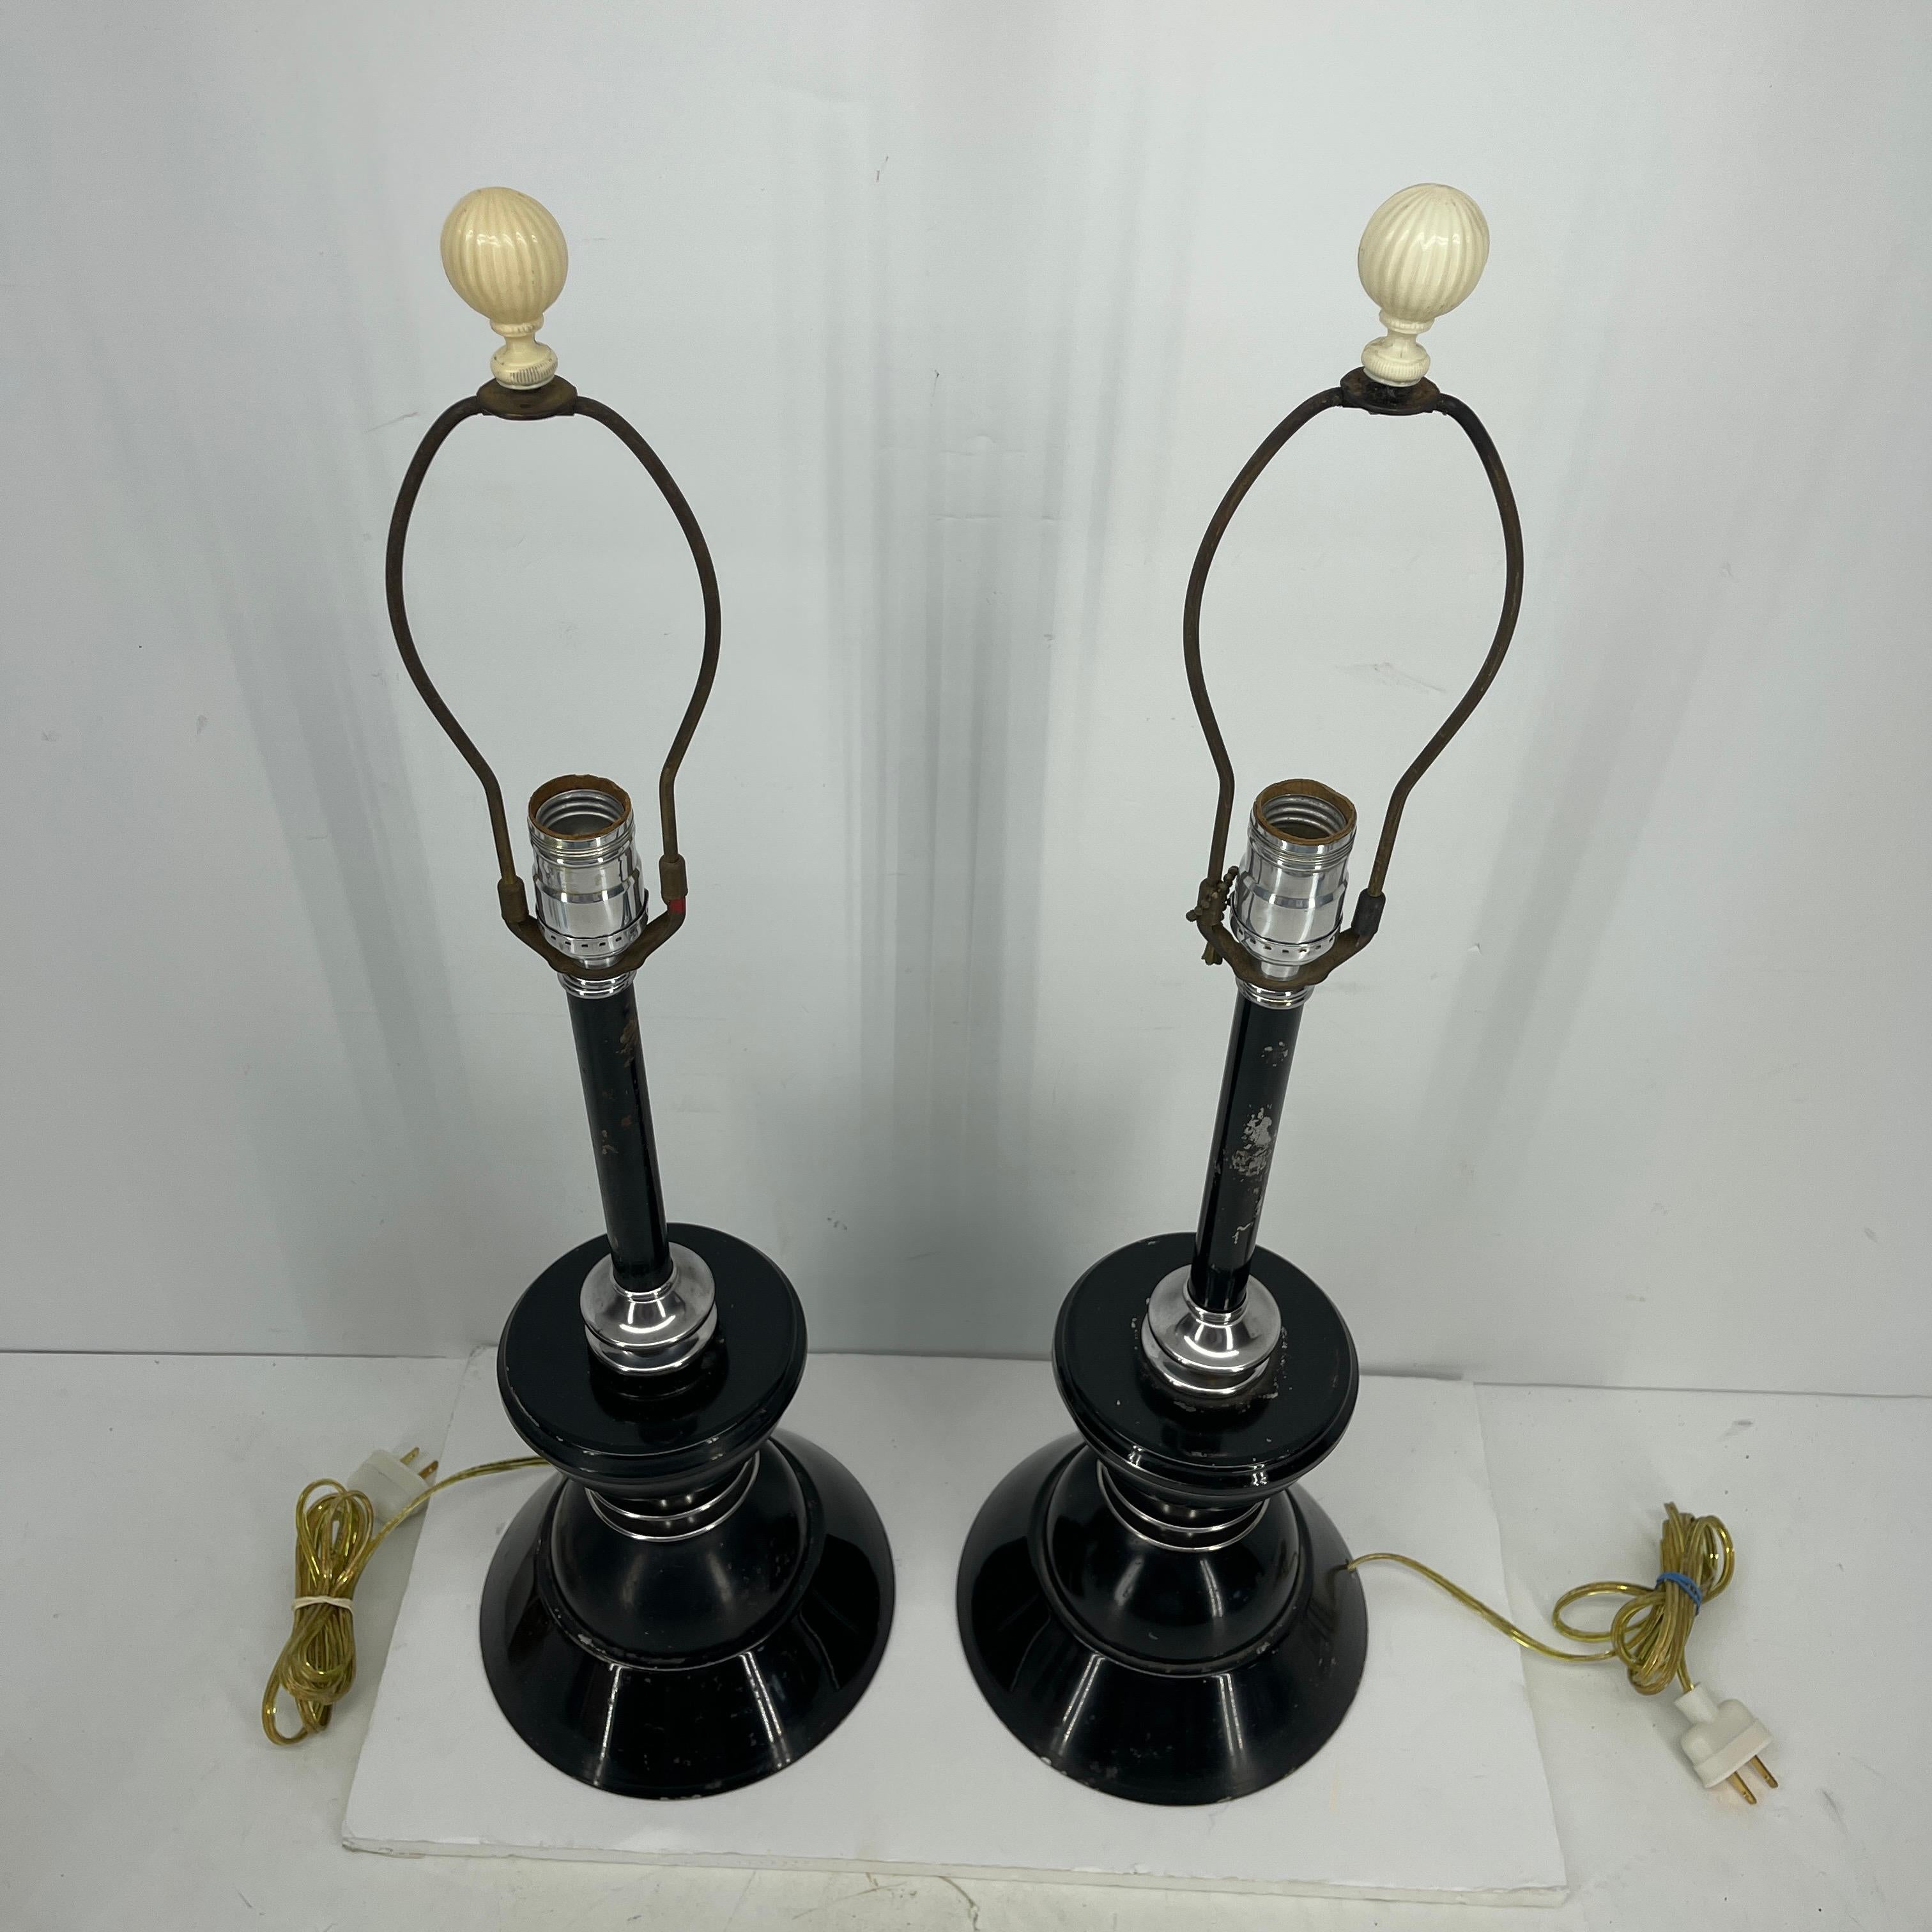 American Pair of Early Mid-Century Modern Black Toleware Chrome Lamps For Sale